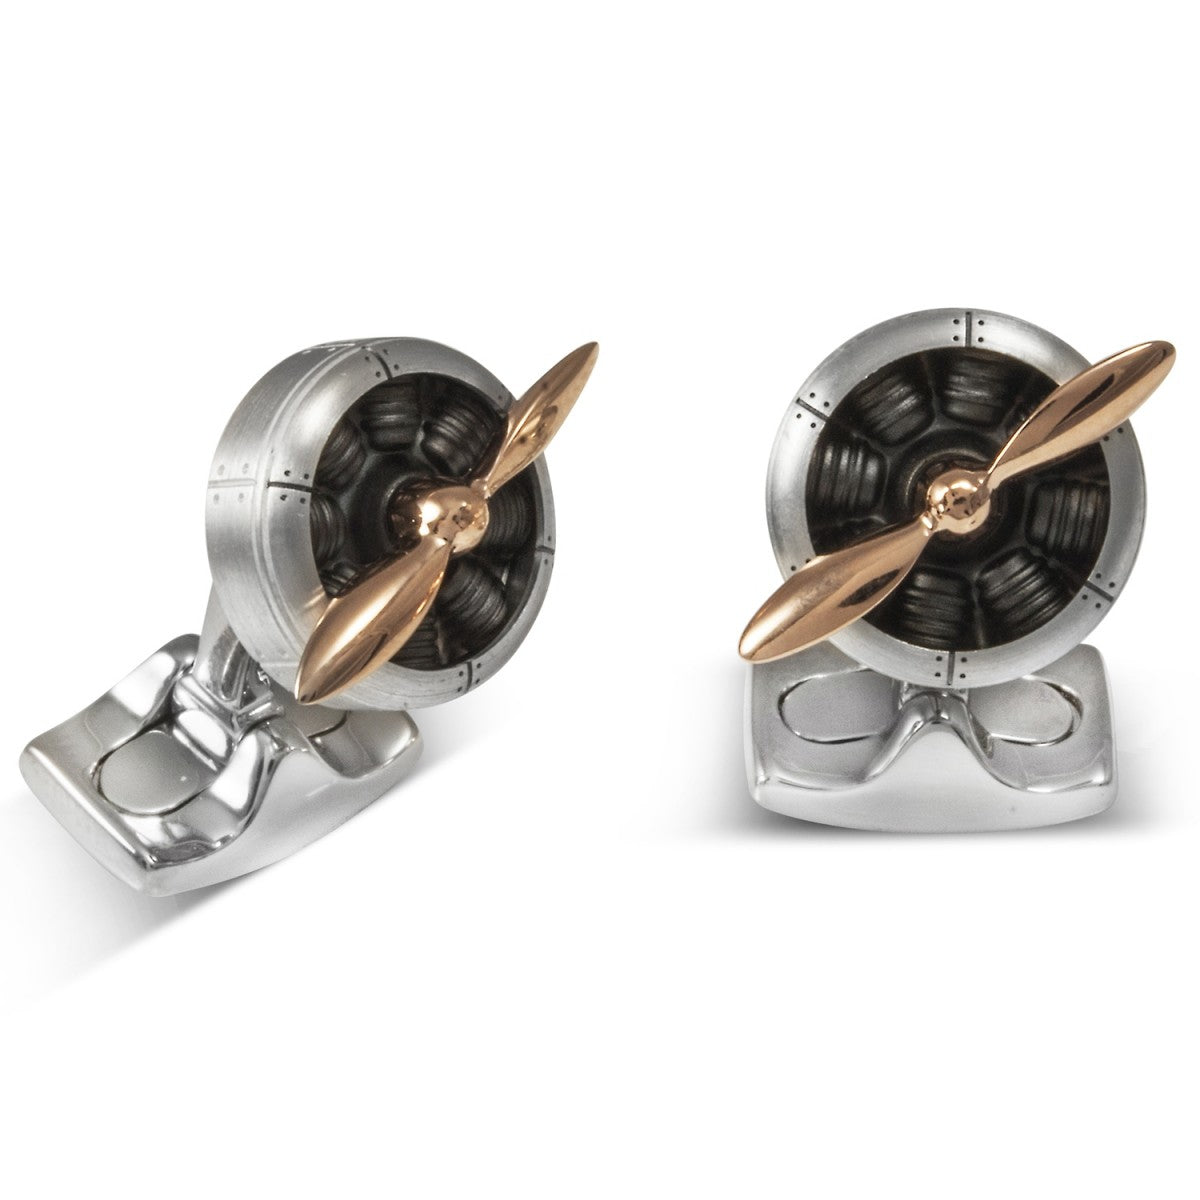 Deakin and Francis Fundamentals Mechanicals Sop with Engine in Rose Gold Cufflinks